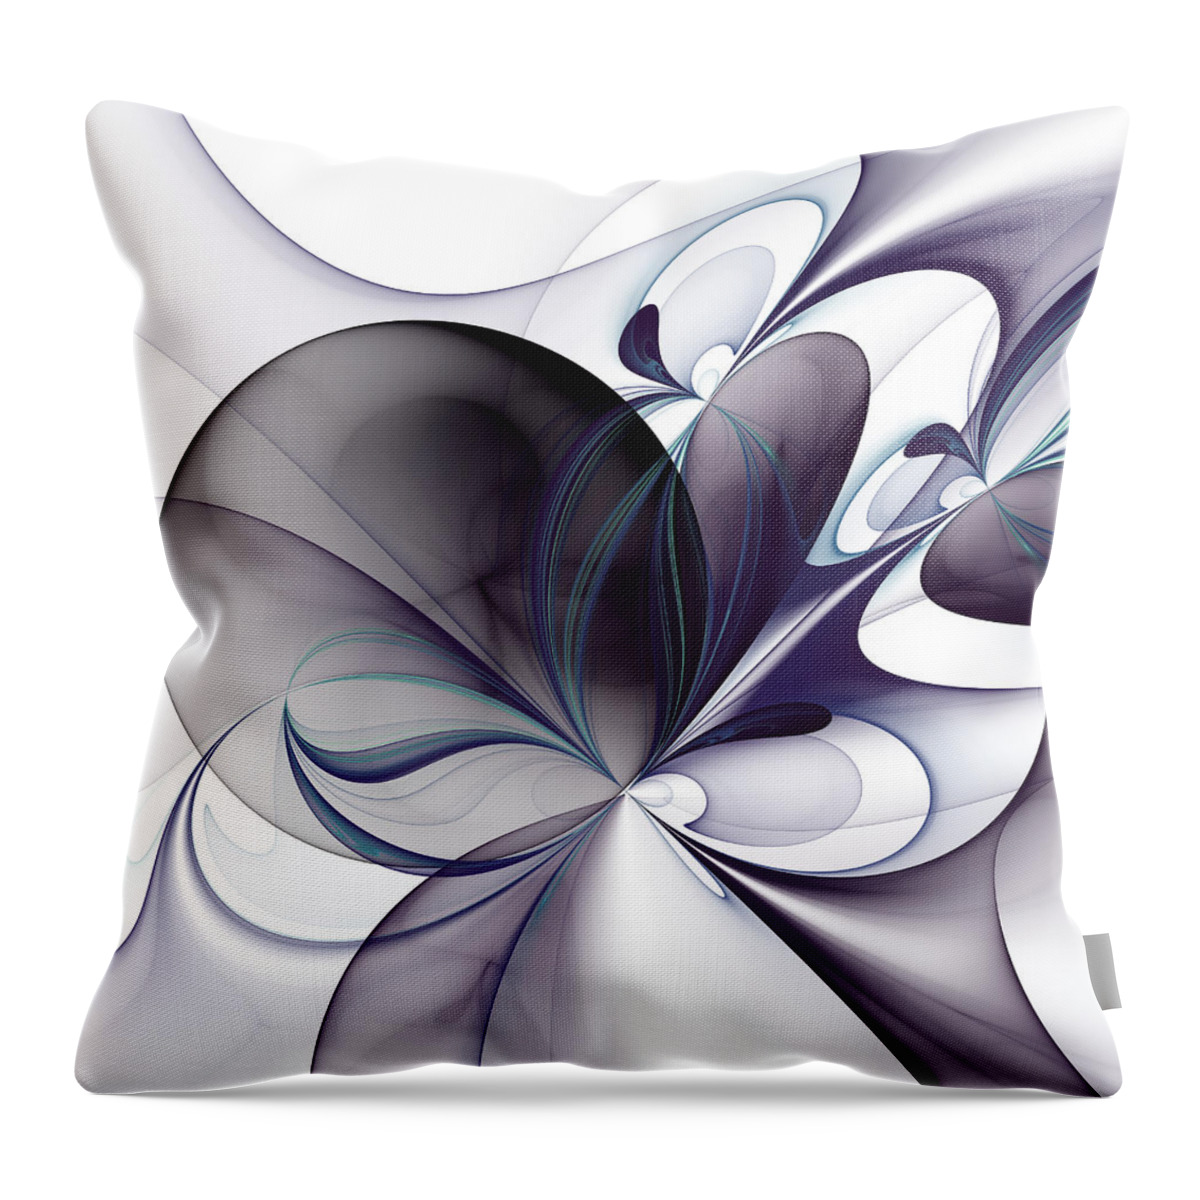 Abstract Throw Pillow featuring the digital art The Easiness by Gabiw Art